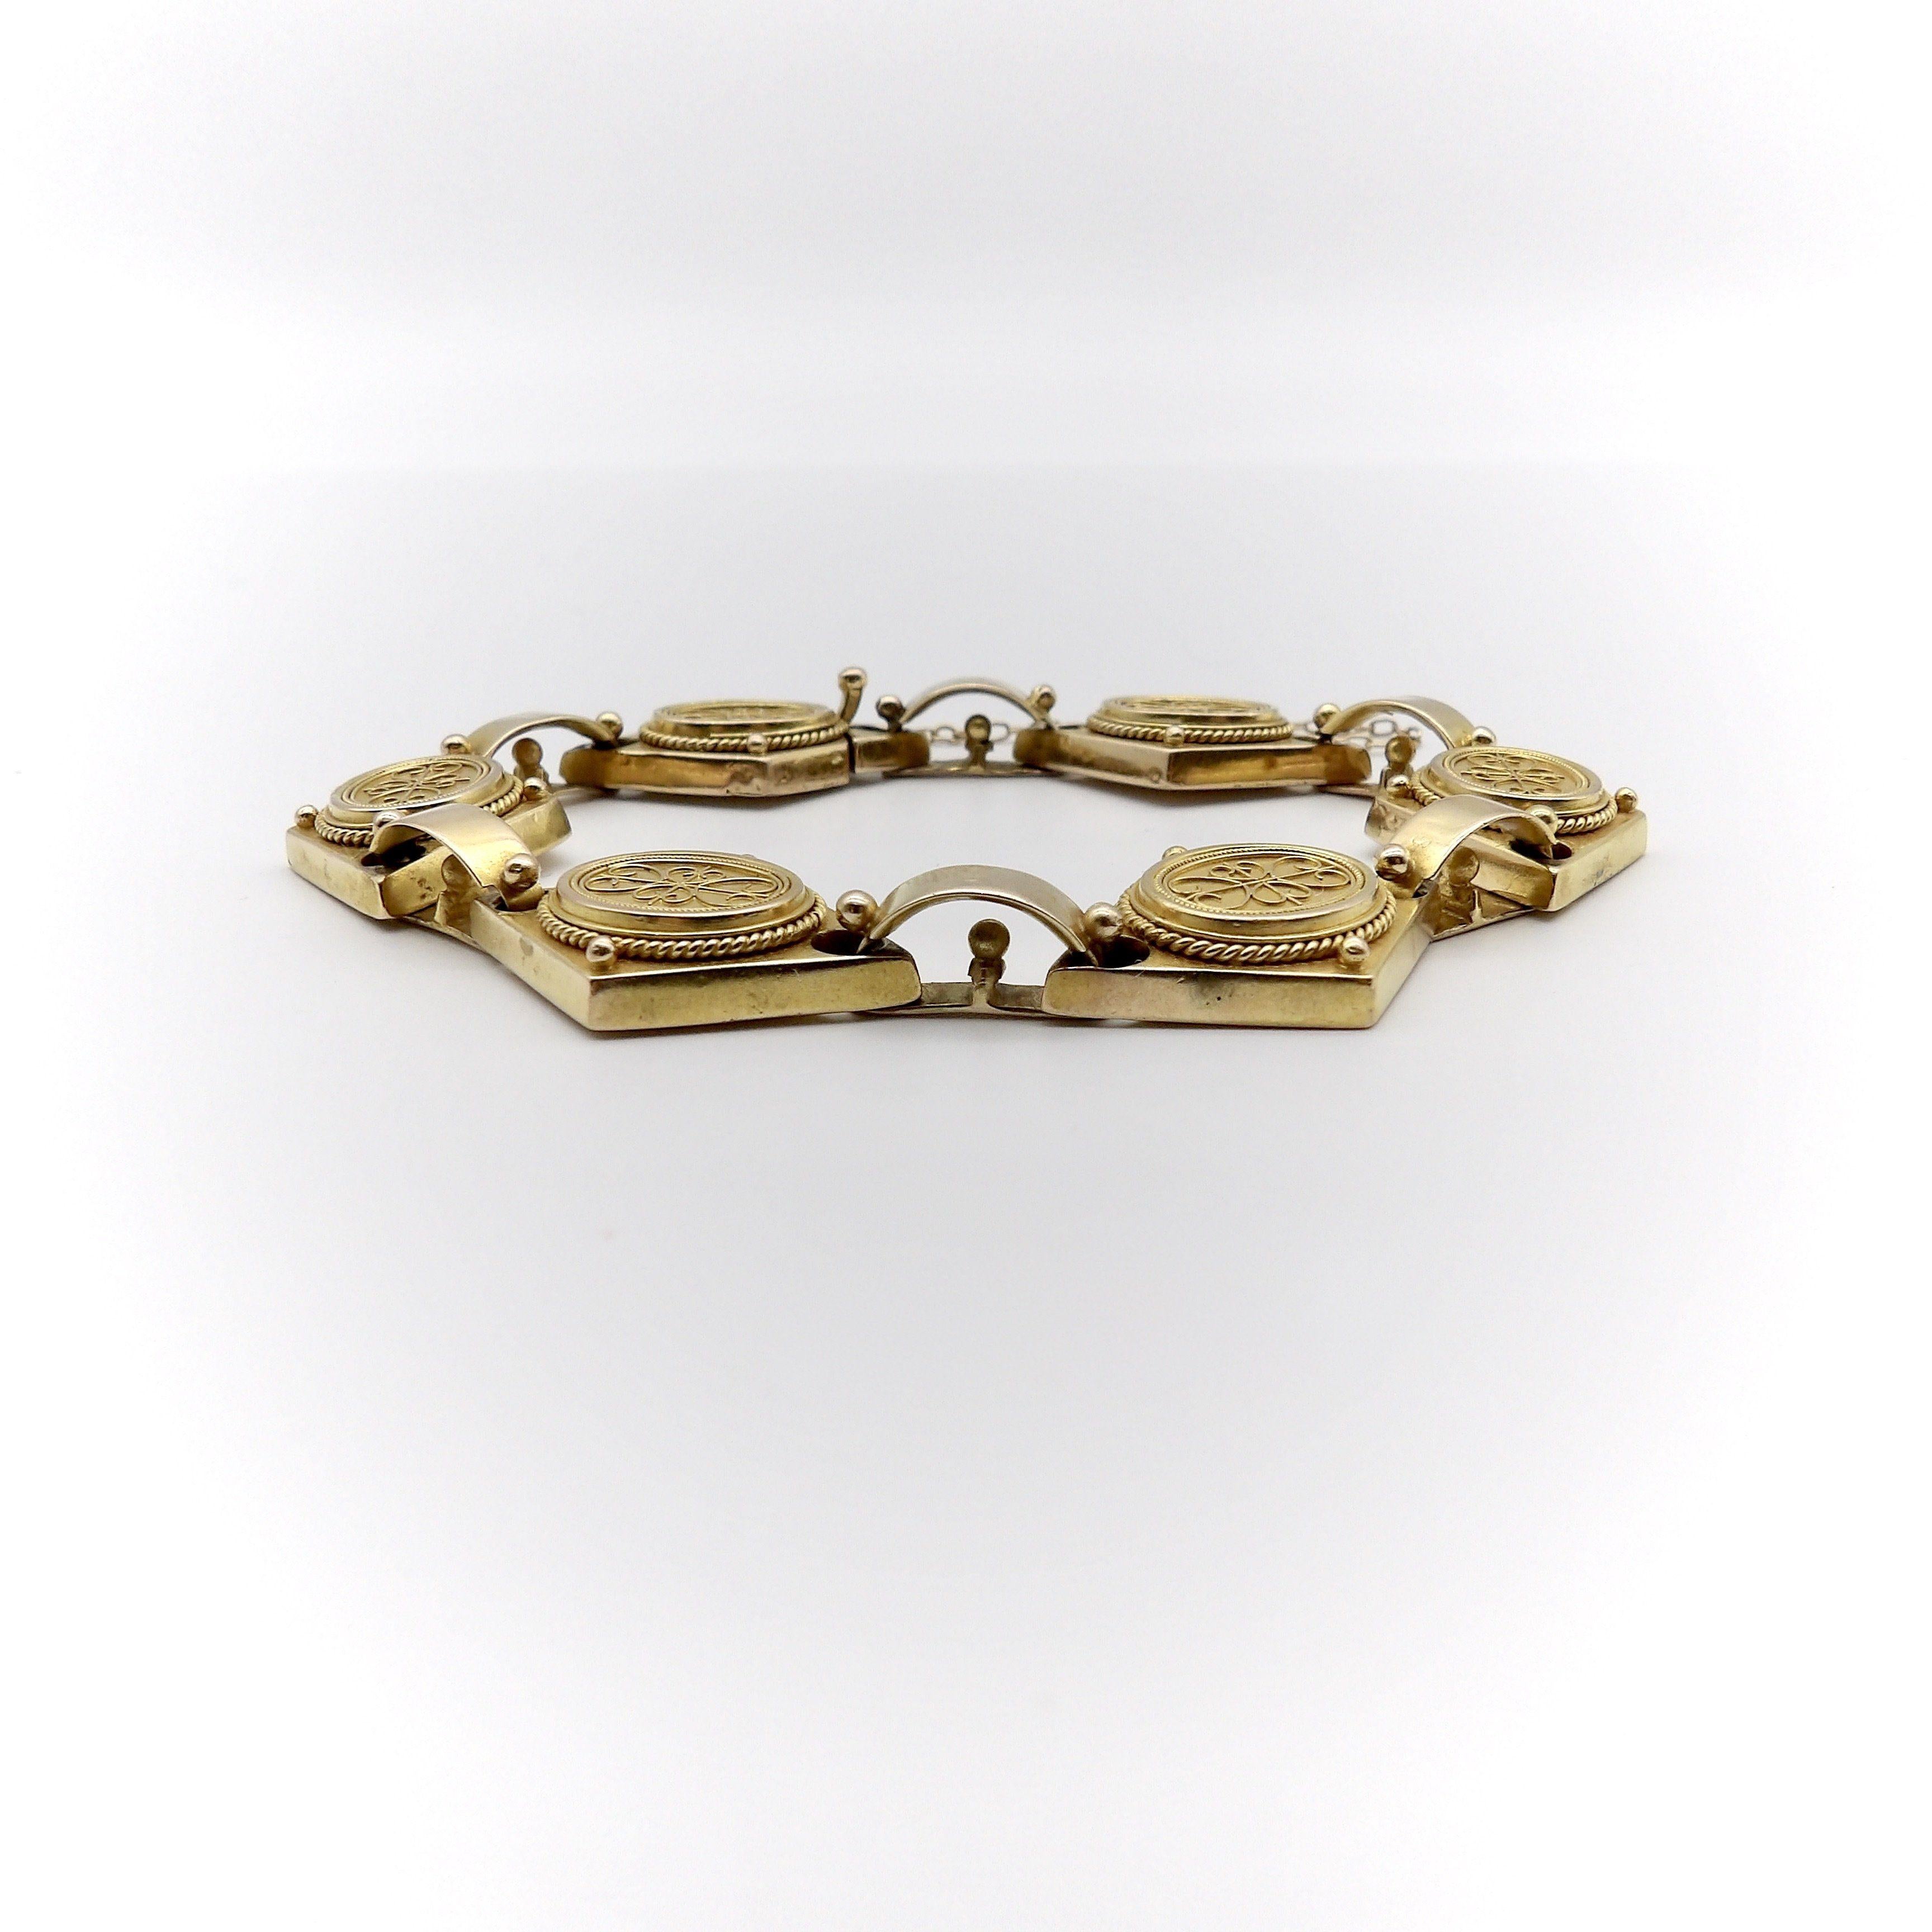 A beautiful 14k yellow gold bracelet from the Etruscan Revival period, circa 1880. The bracelet is exquisitely hand-made and is a fine example of cannetille gold work, which is similar to filigree work with fine gold wires that curl around thinly